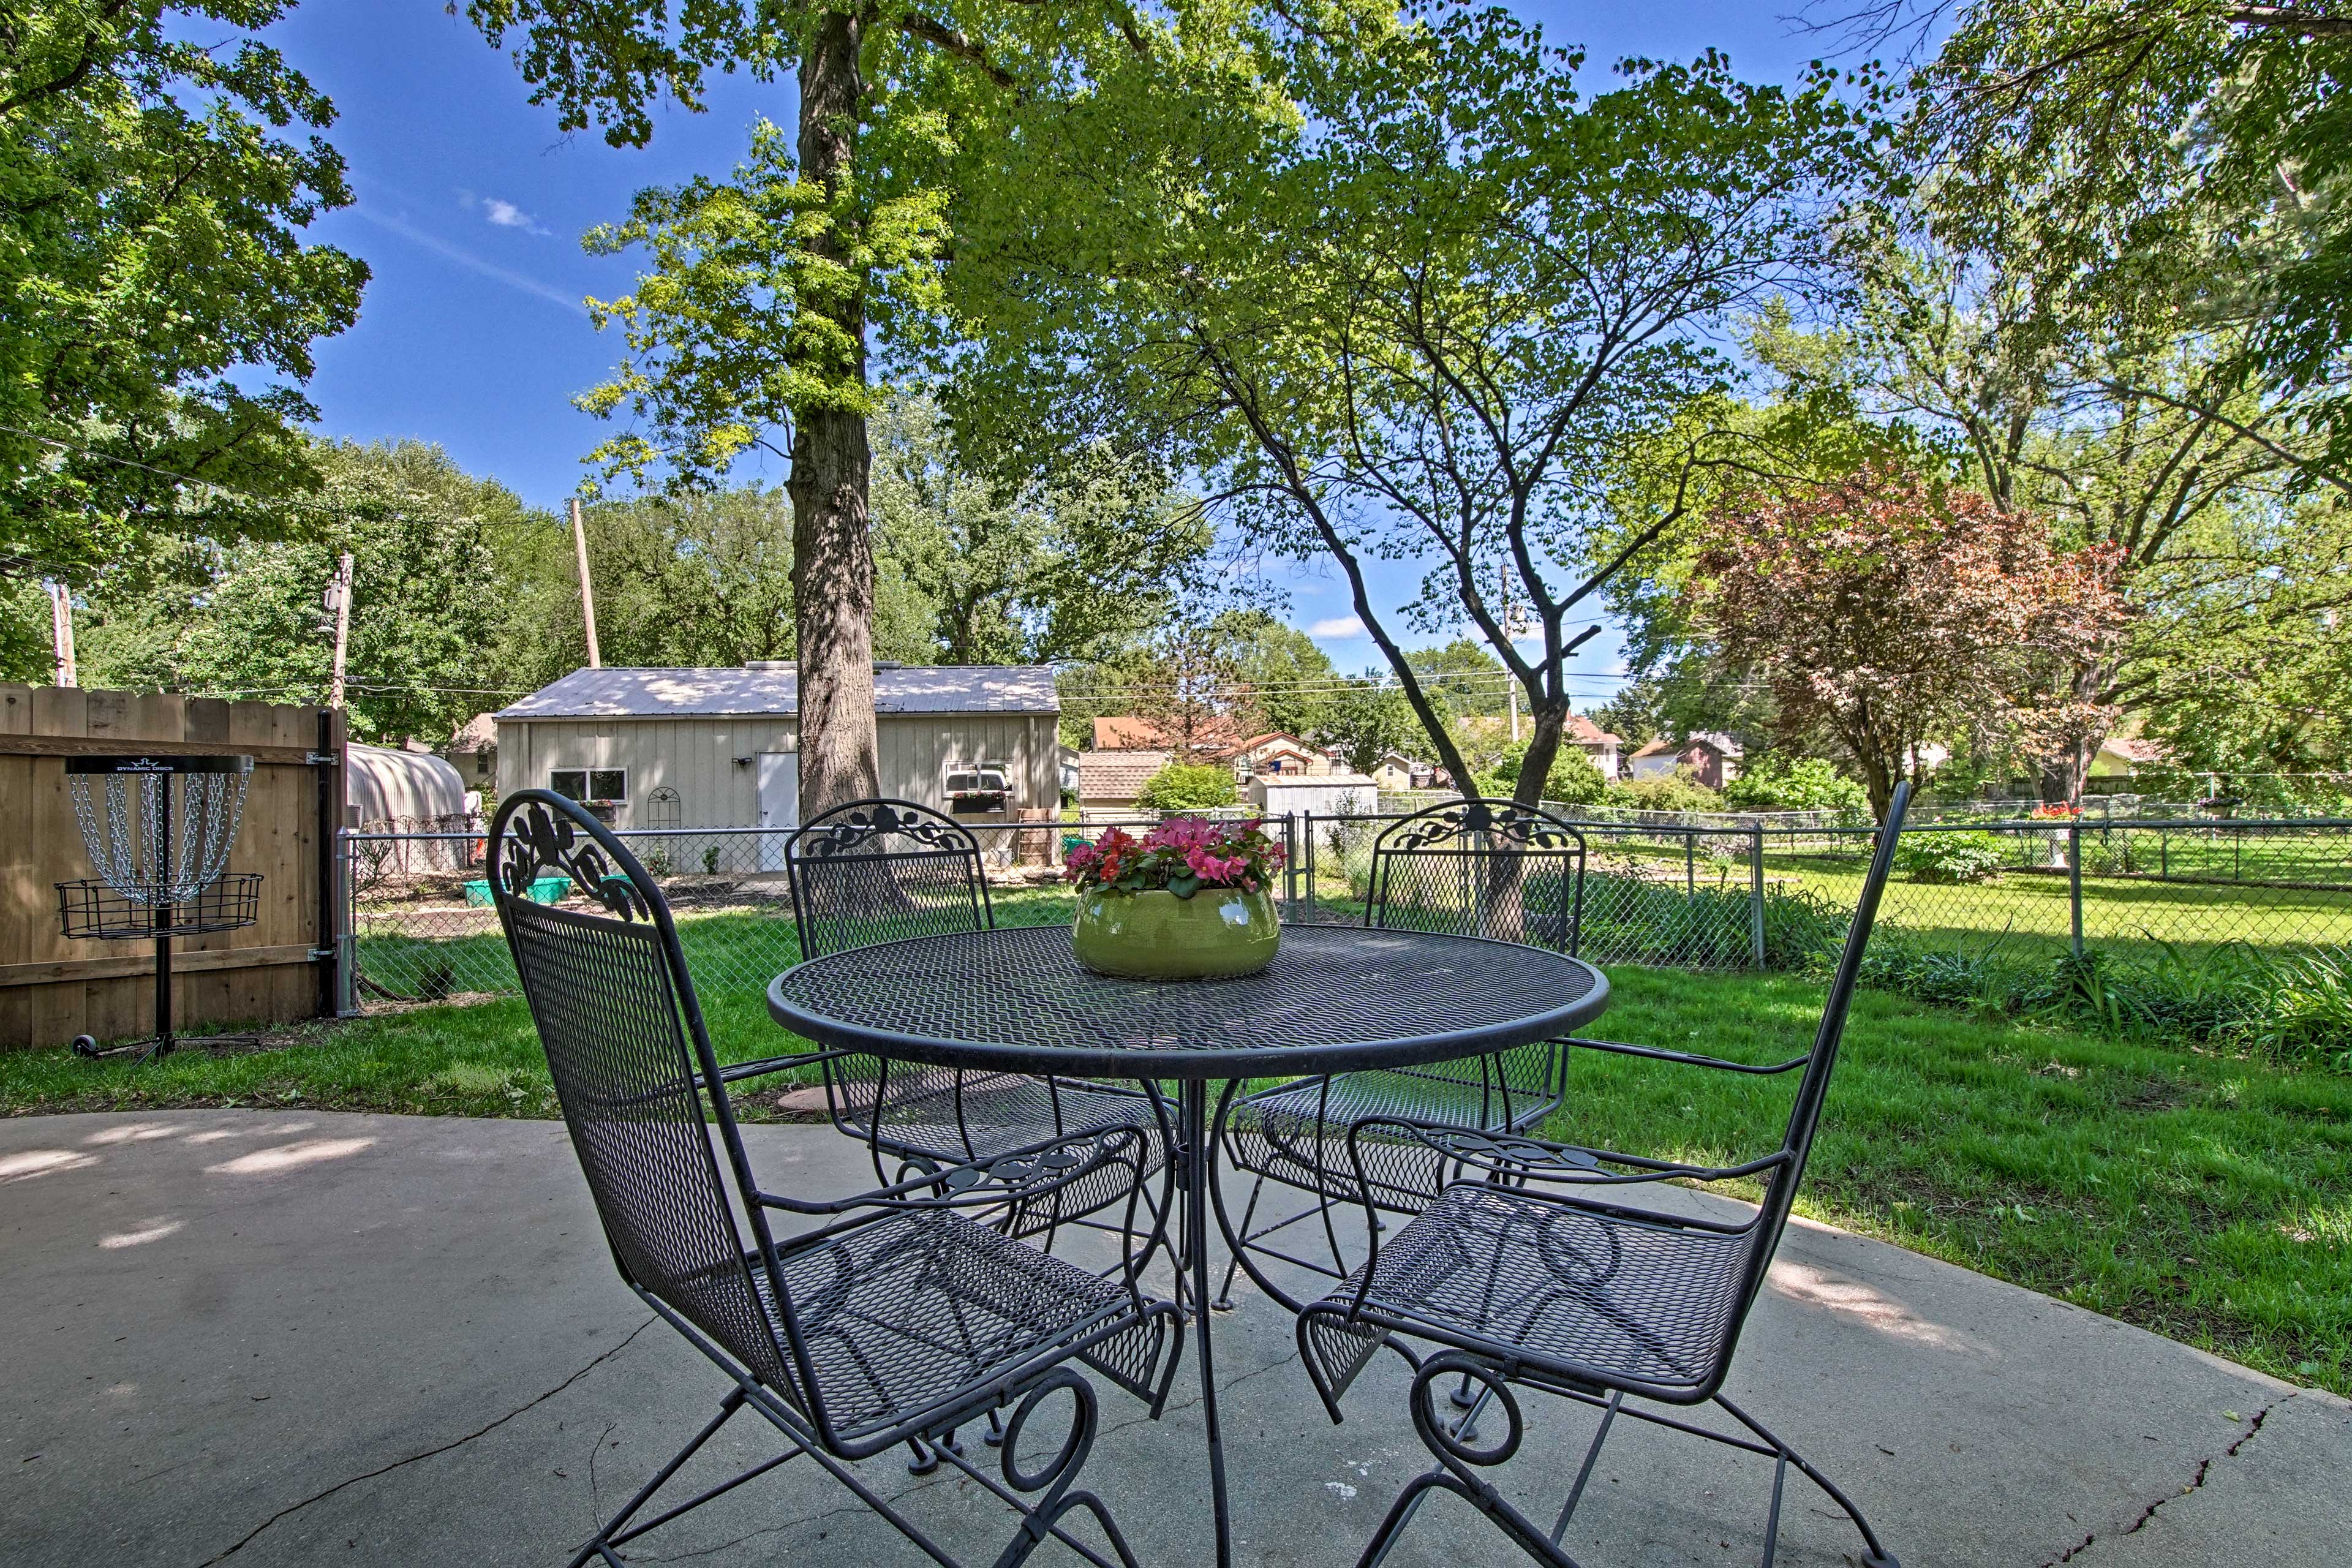 The patio includes a quaint 4-person table.